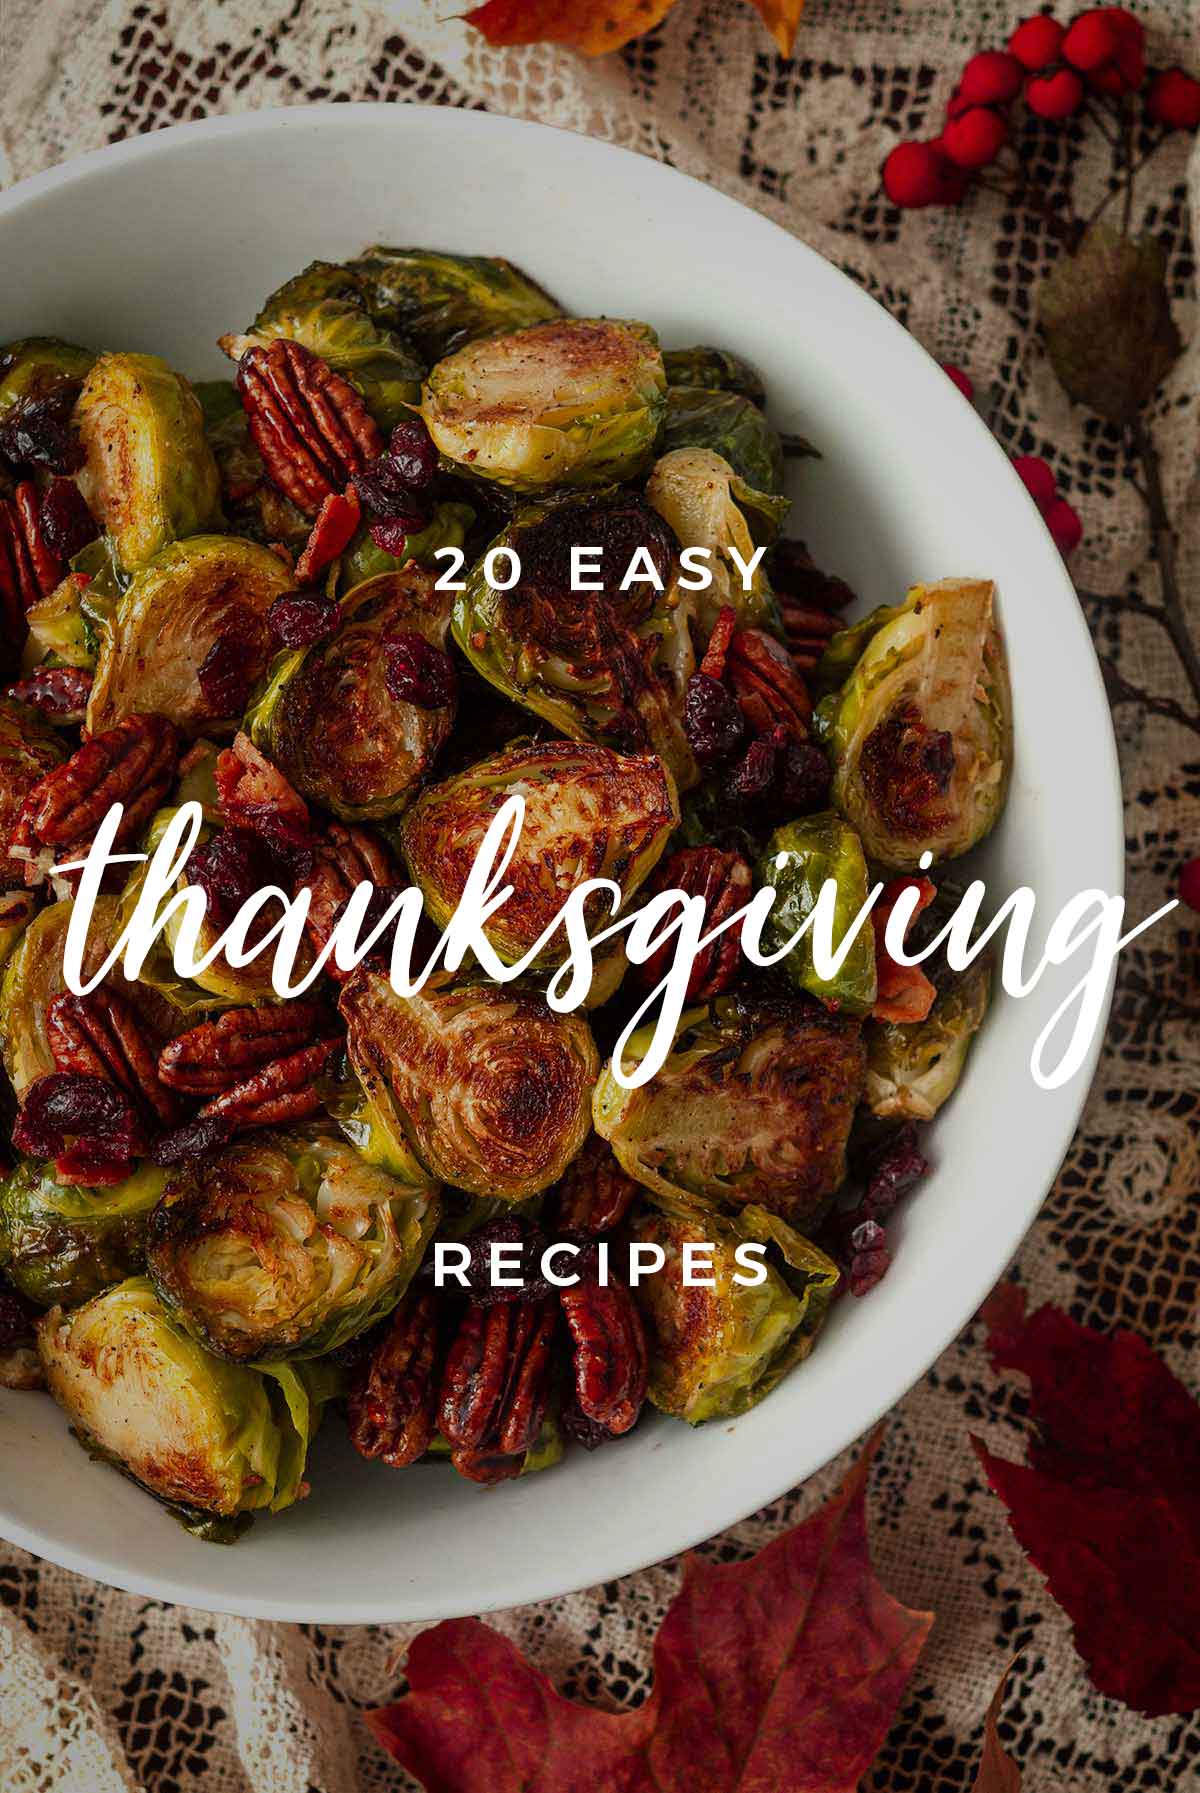 A bowl of Brussels sprouts with a title that says "20 Easy Thanksgiving Recipes."